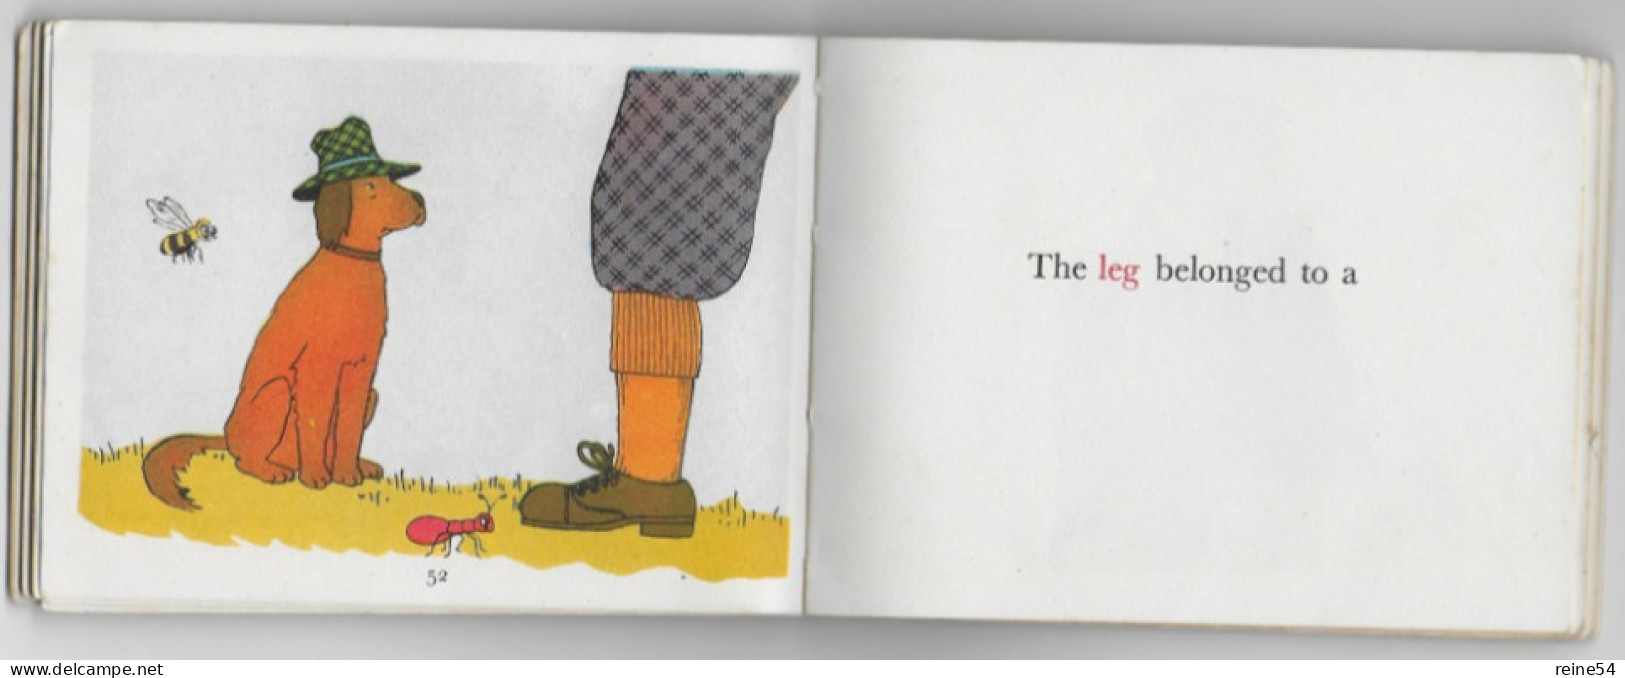 ANT And BEE -Angela BANNER -An Alphabetical Story For Tiny Tots- Edmund Ward - Schoolboeken